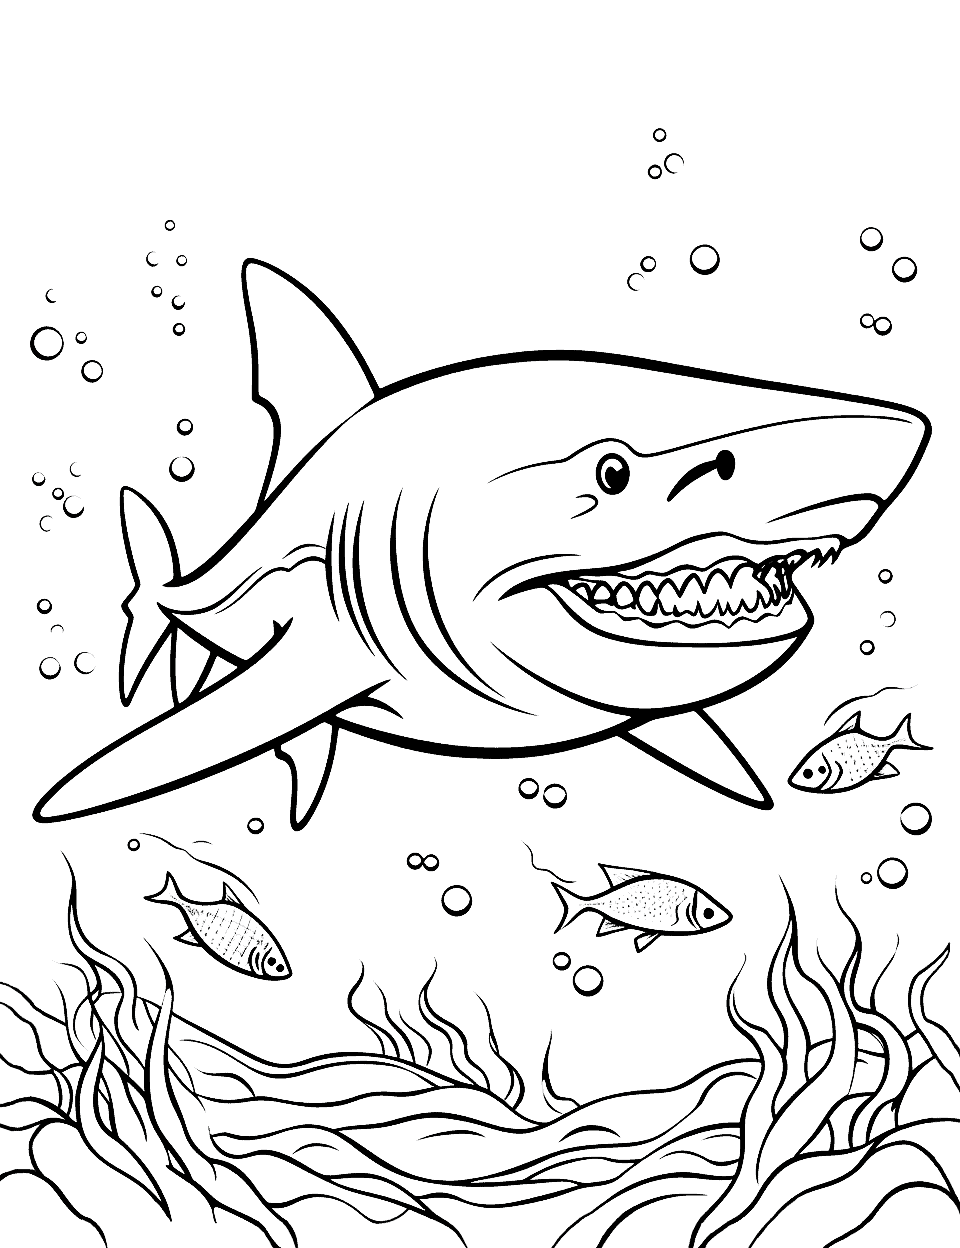 Tiger Shark Hunting Coloring Page - A fierce scene of a tiger shark hunting down its prey.